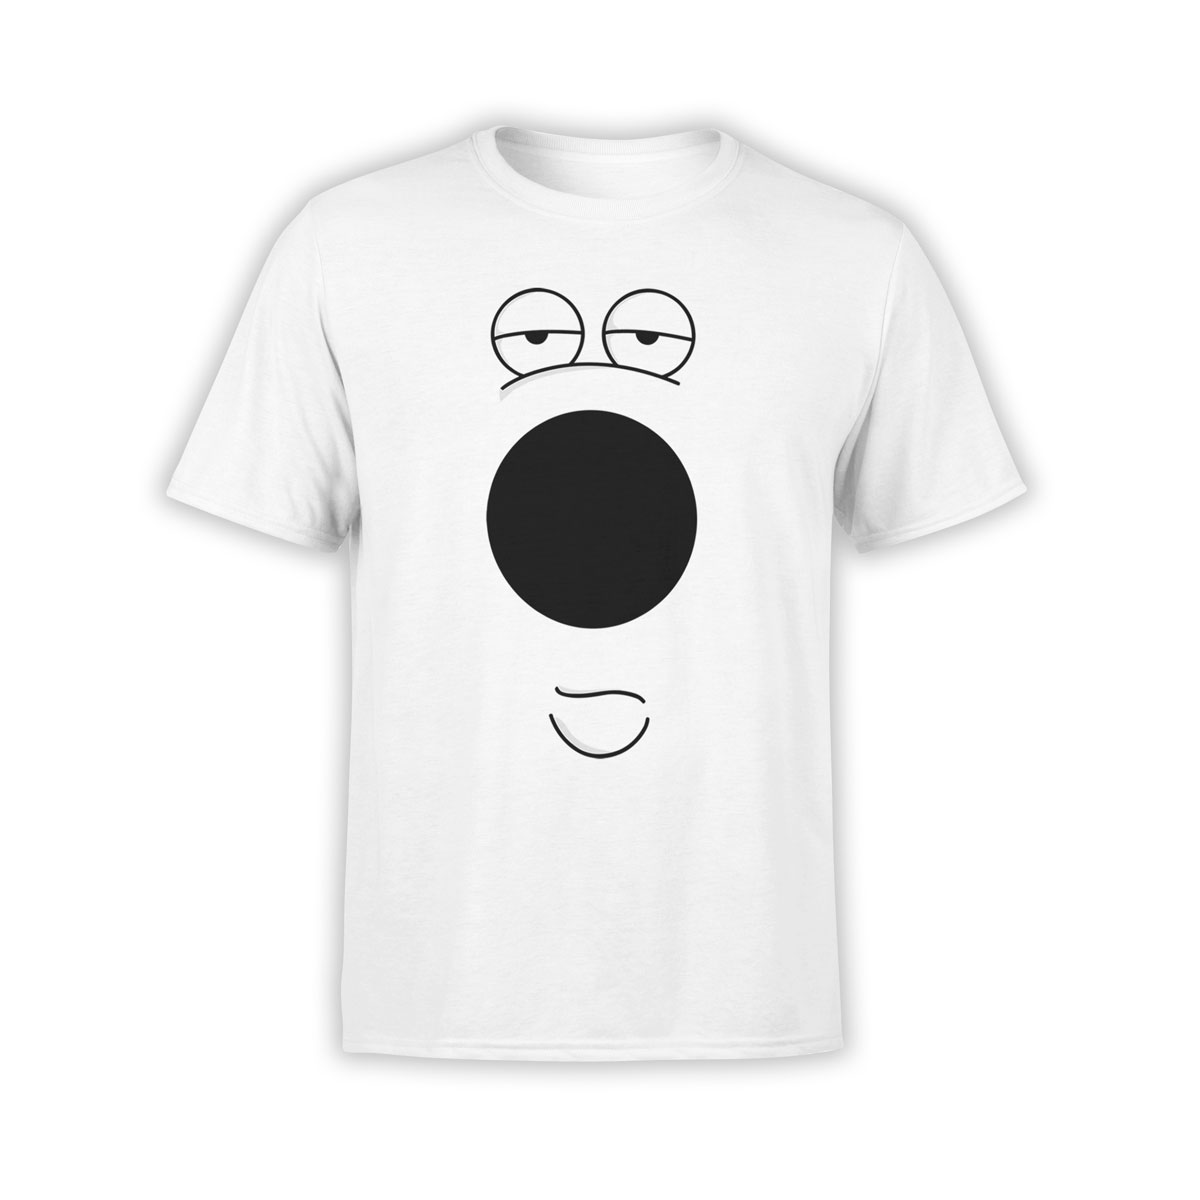 https://fantucci.com/wp-content/uploads/2018/01/0195_Brian_Griffin_Front_White.jpg